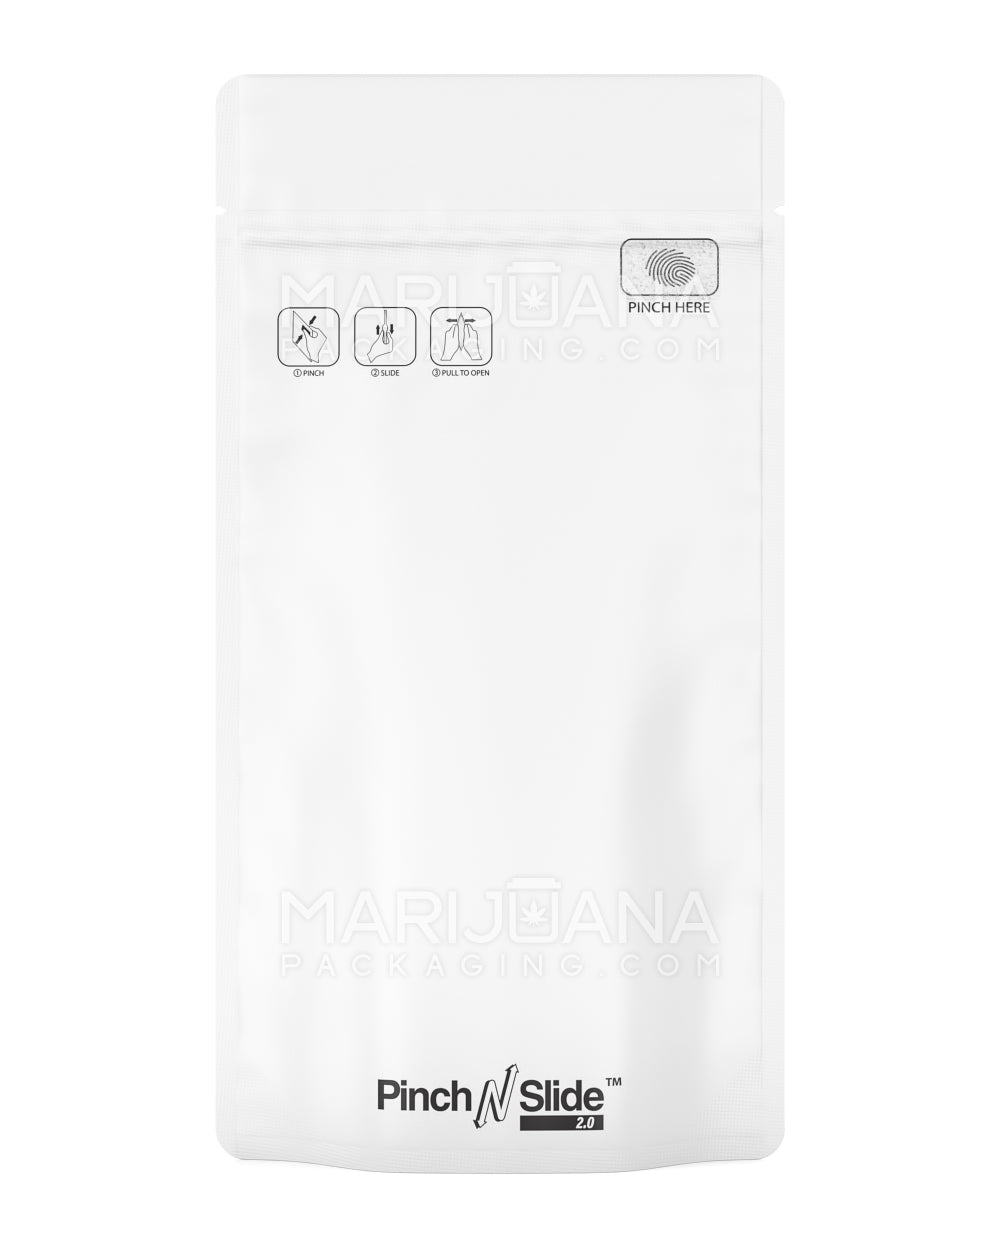 Child Resistant & Tamper Evident | Pinch N Slide 3.0 Matte White Mylar Bags | 5in x 8.8in - 14g - 250 Count - 1